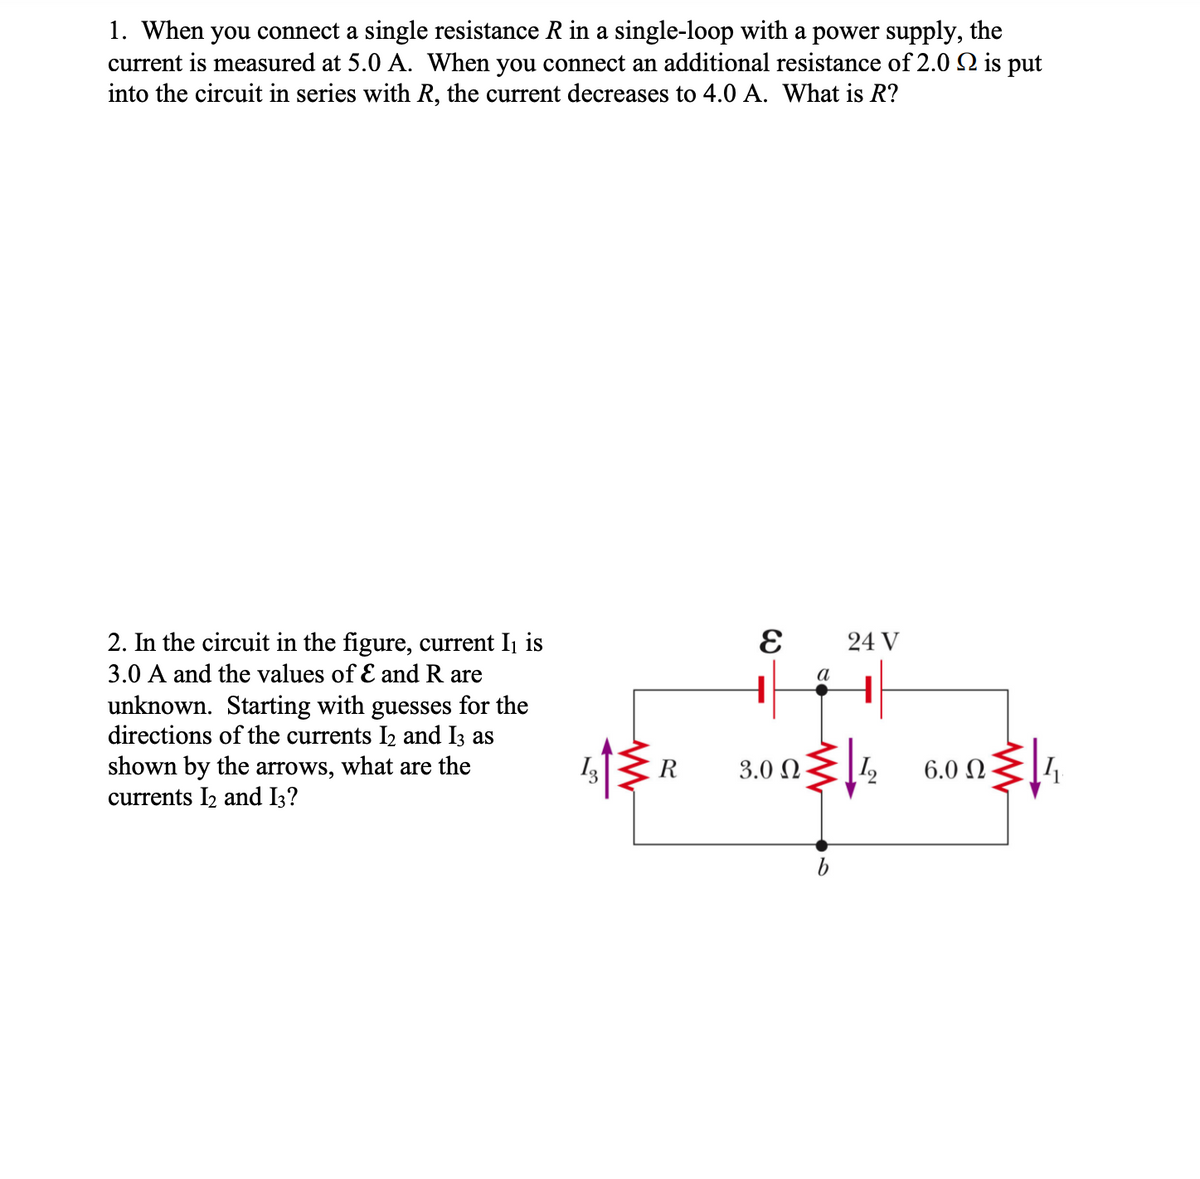 1. When you connect a single resistance R in a single-loop with a power supply, the
current is measured at 5.0 A. When you connect an additional resistance of 2.0 2 is put
into the circuit in series with R, the current decreases to 4.0 A. What is R?
2. In the circuit in the figure, current Ij is
24 V
3.0 A and the values of E and R are
а
unknown. Starting with guesses for the
directions of the currents I2 and I3 as
shown by the arrows, what are the
currents I2 and I3?
R
3.0 N
|I,
6.0 N
